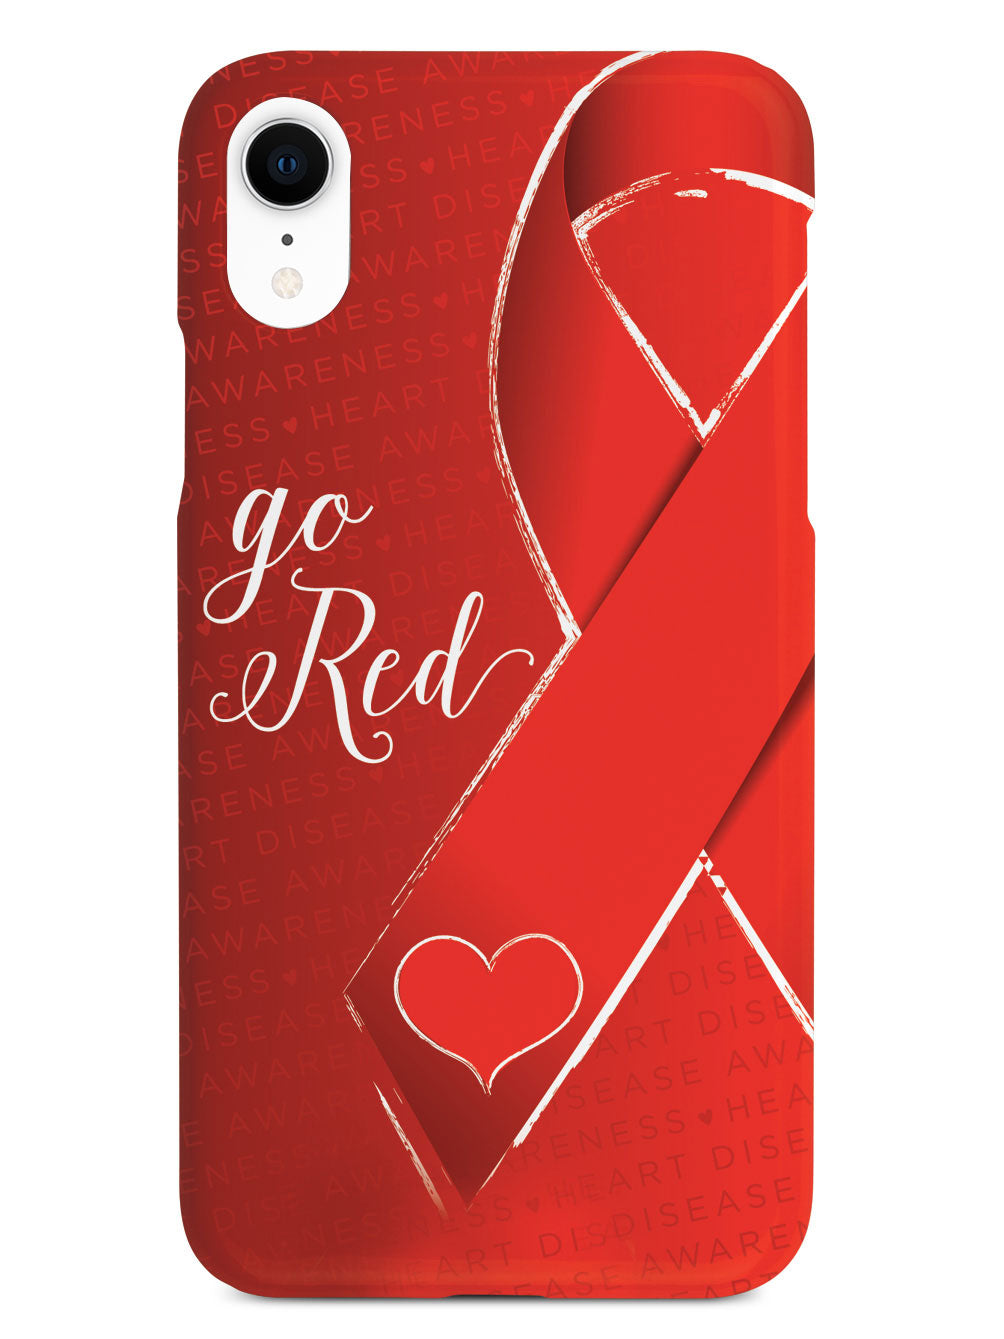 Go Red for Heart Disease Awareness Case